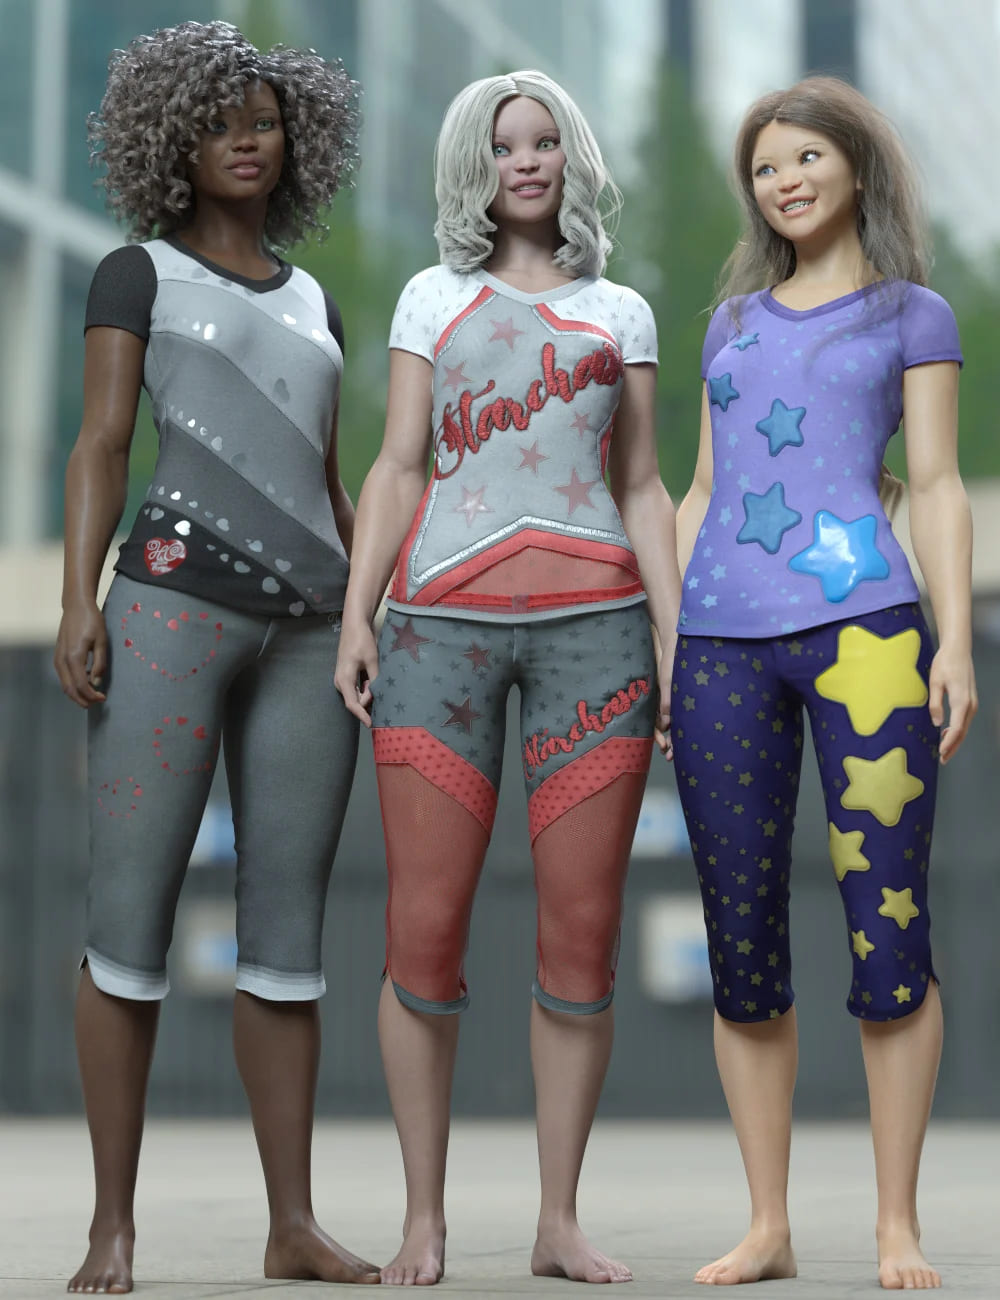 Playful Styles for Everyday 2 Clothes and Poses Texture Add-on_DAZ3DDL